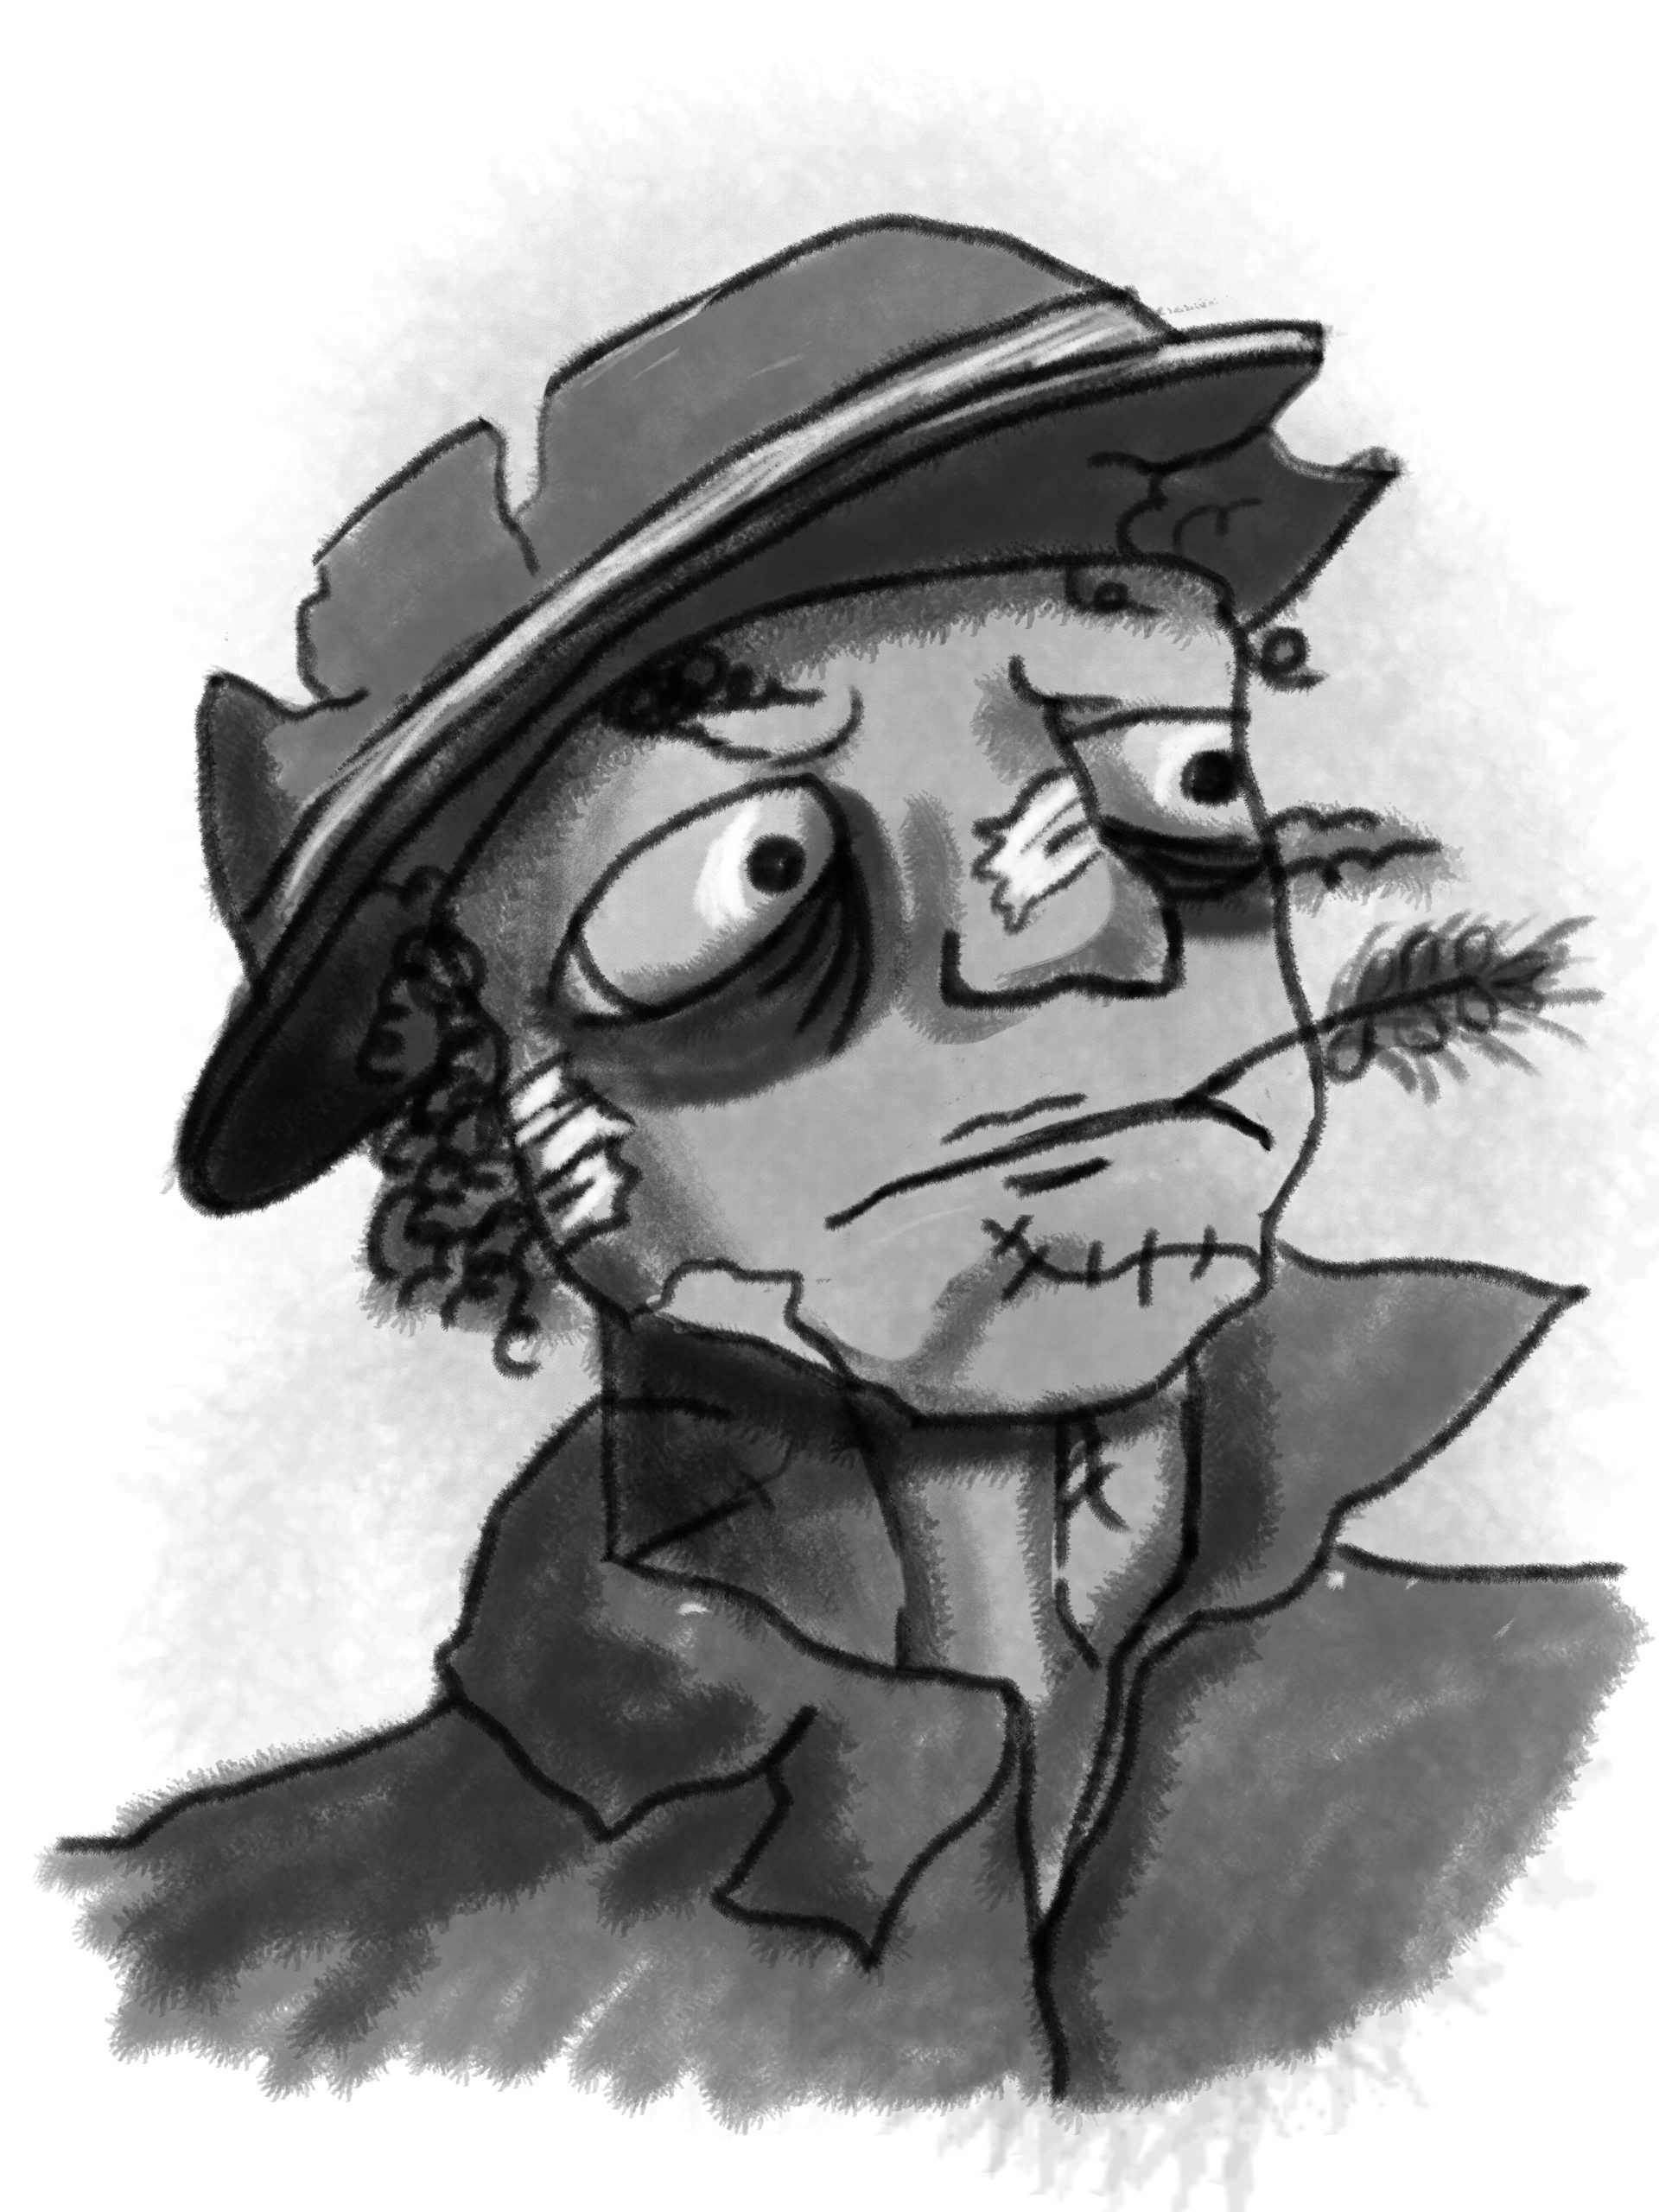 Older zombie wearing a battered hat and chewing a stem of grass.